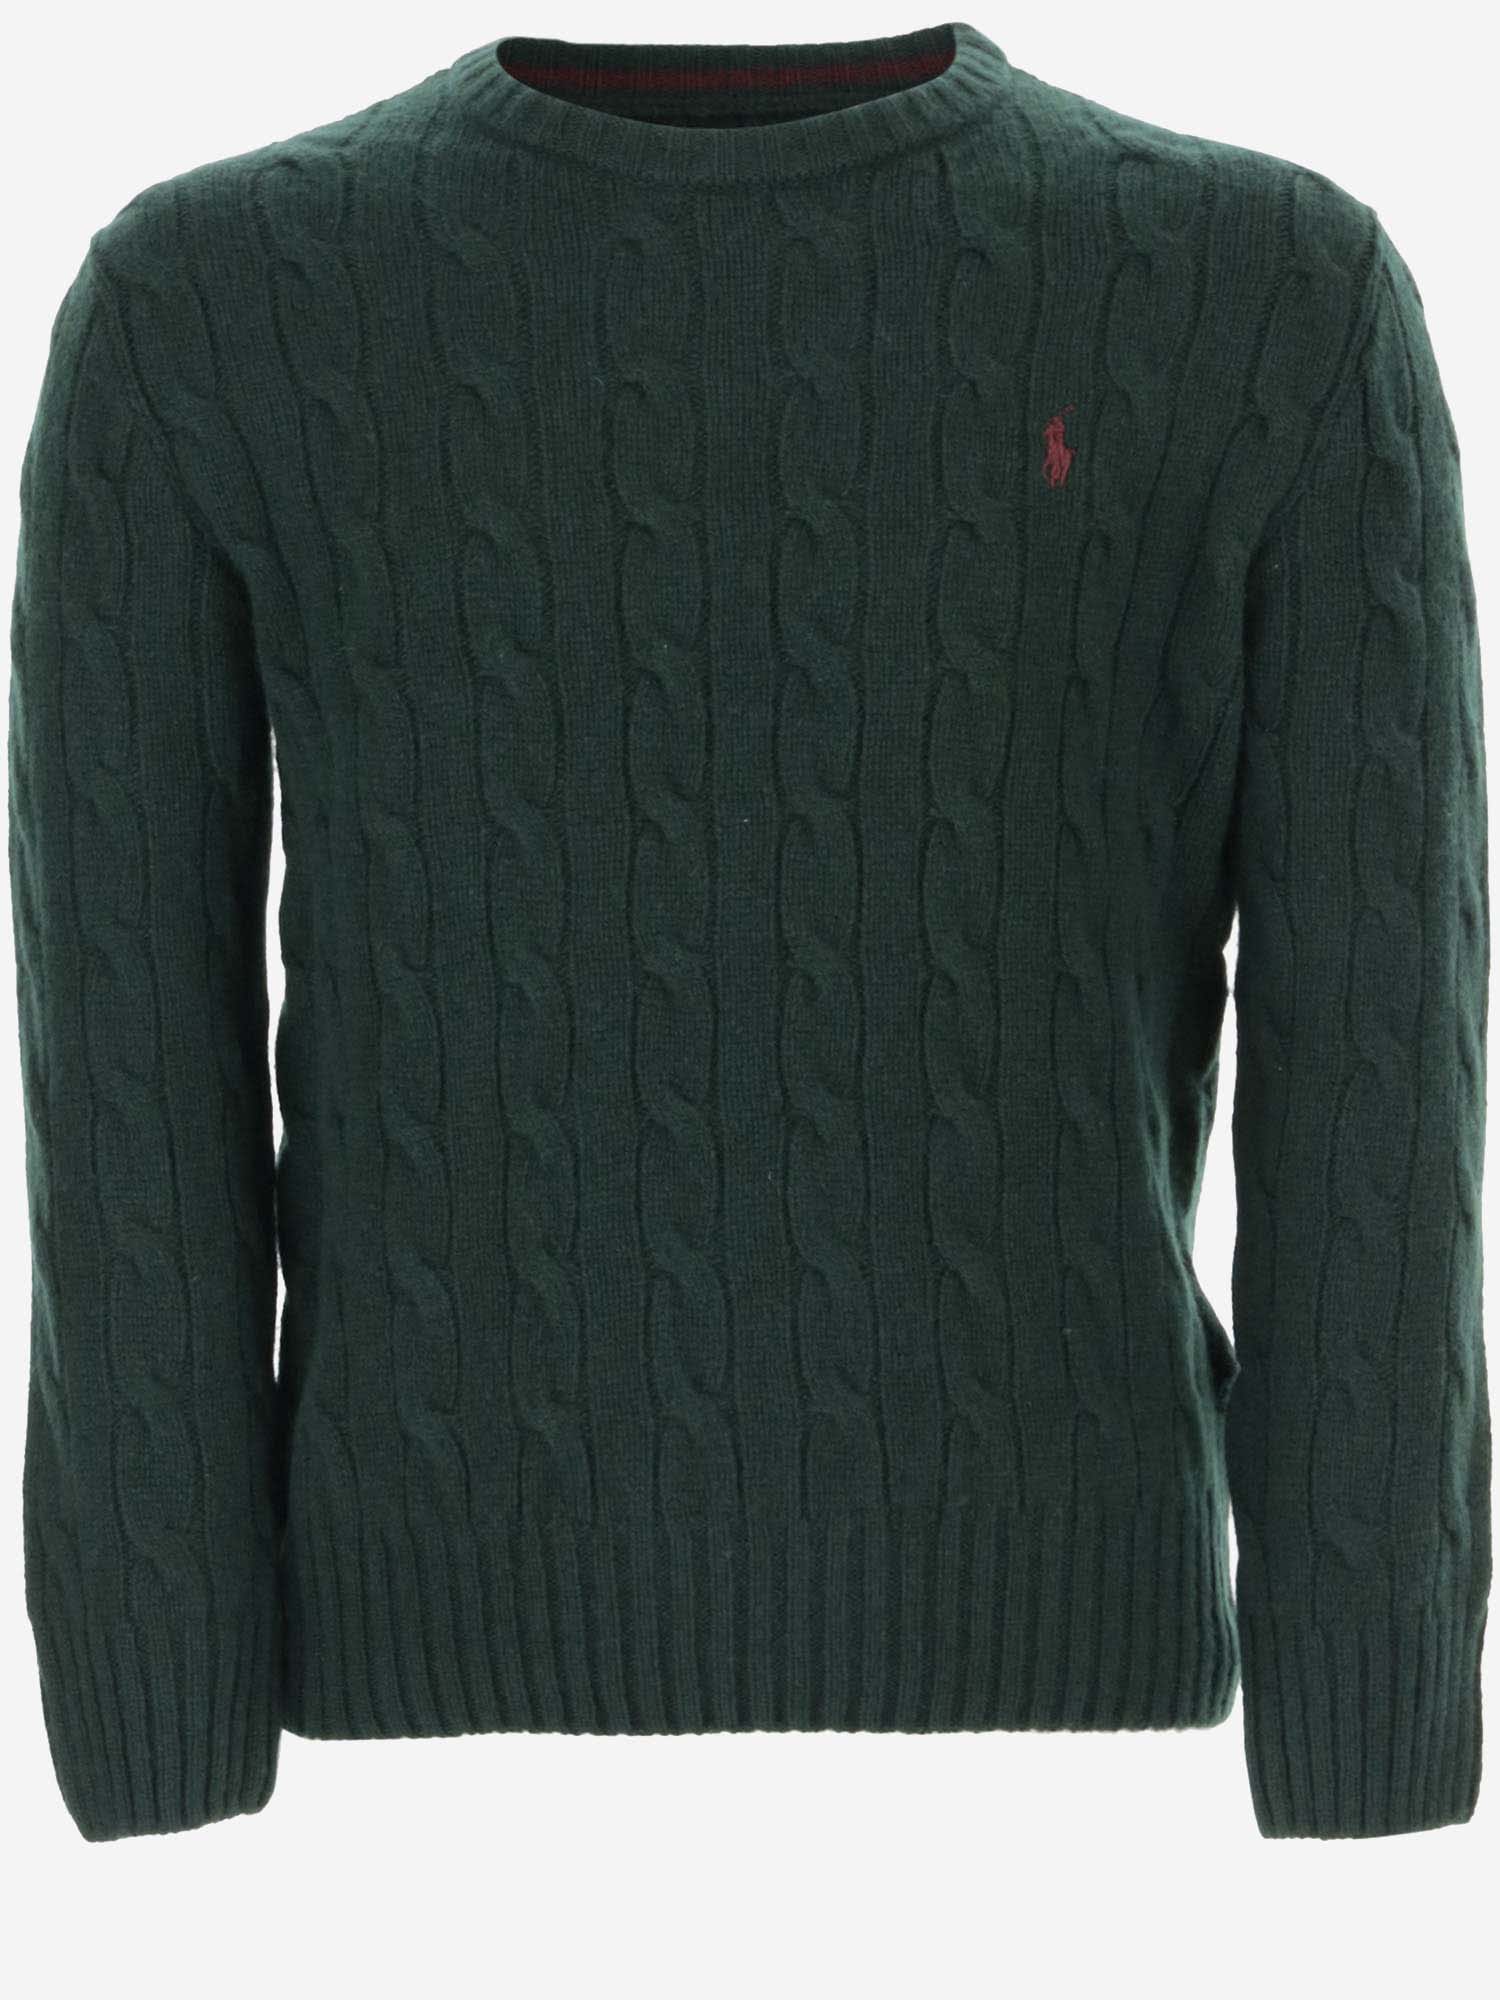 Ralph Lauren Kids' Wool And Cashmere Sweater In Green